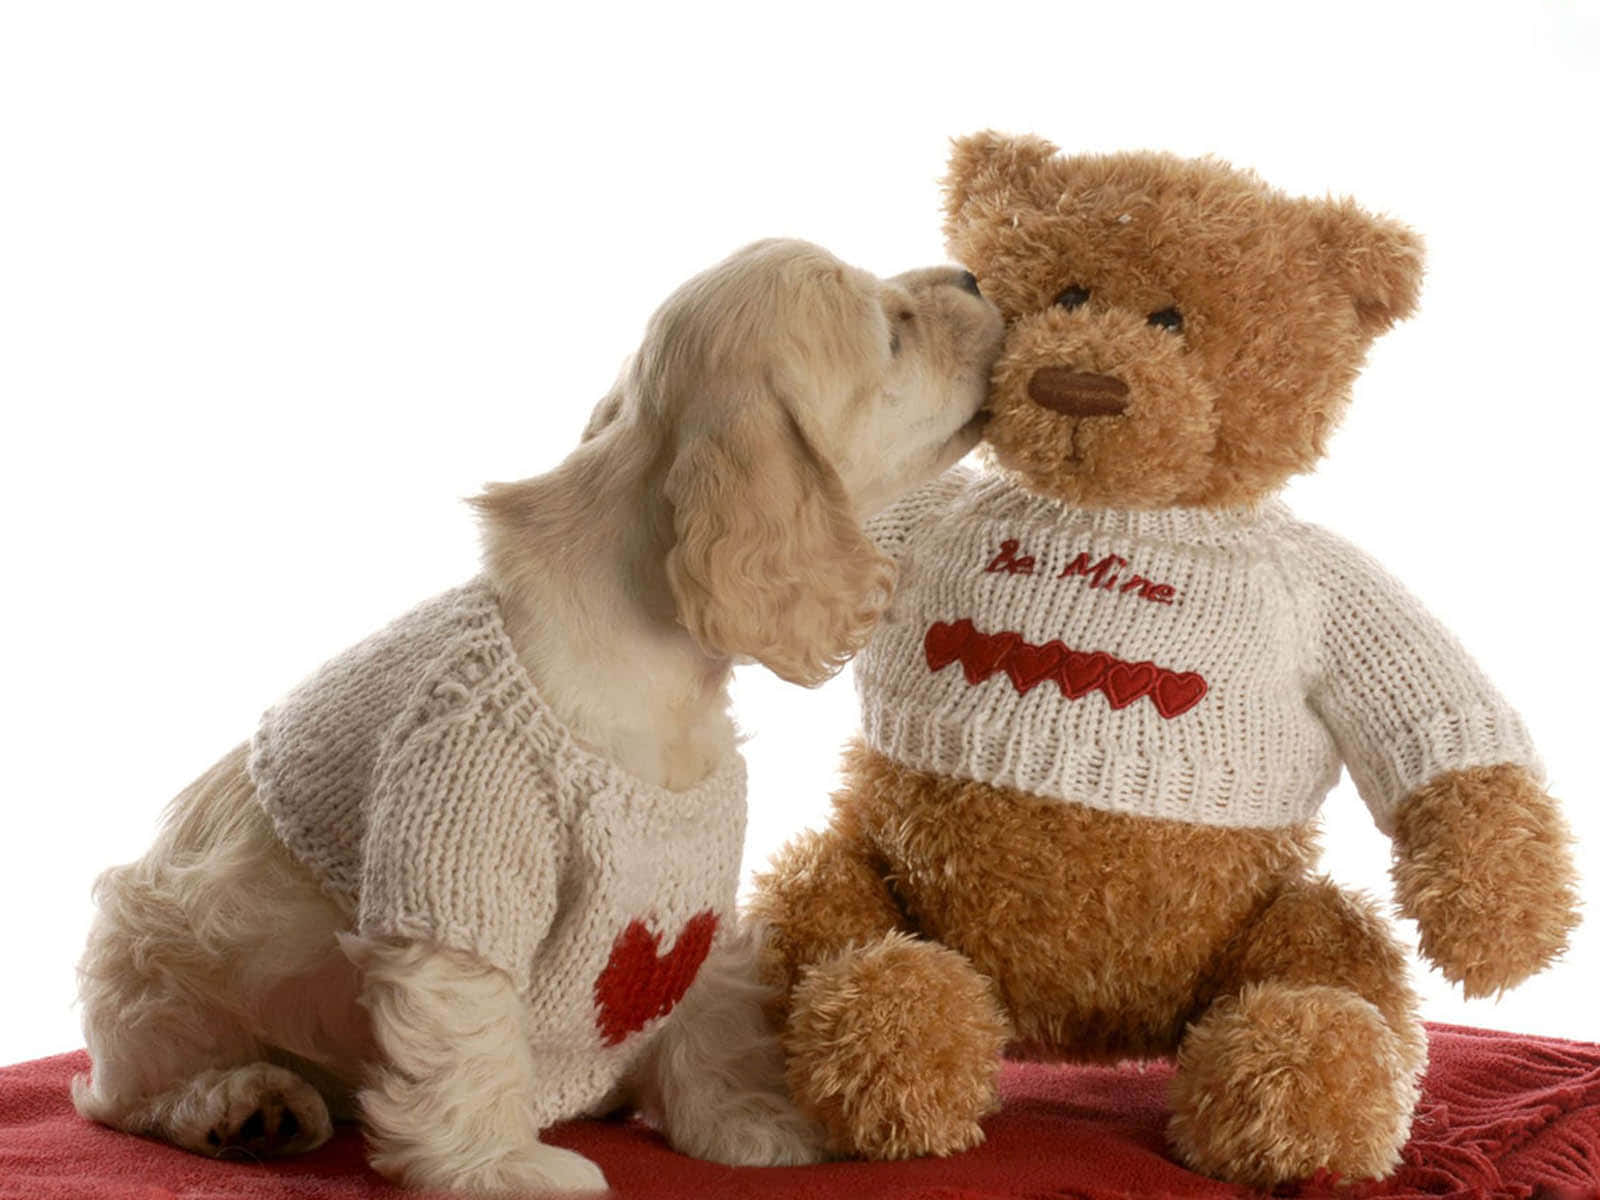 "Cute and cuddly - make your day better with a teddy bear!"